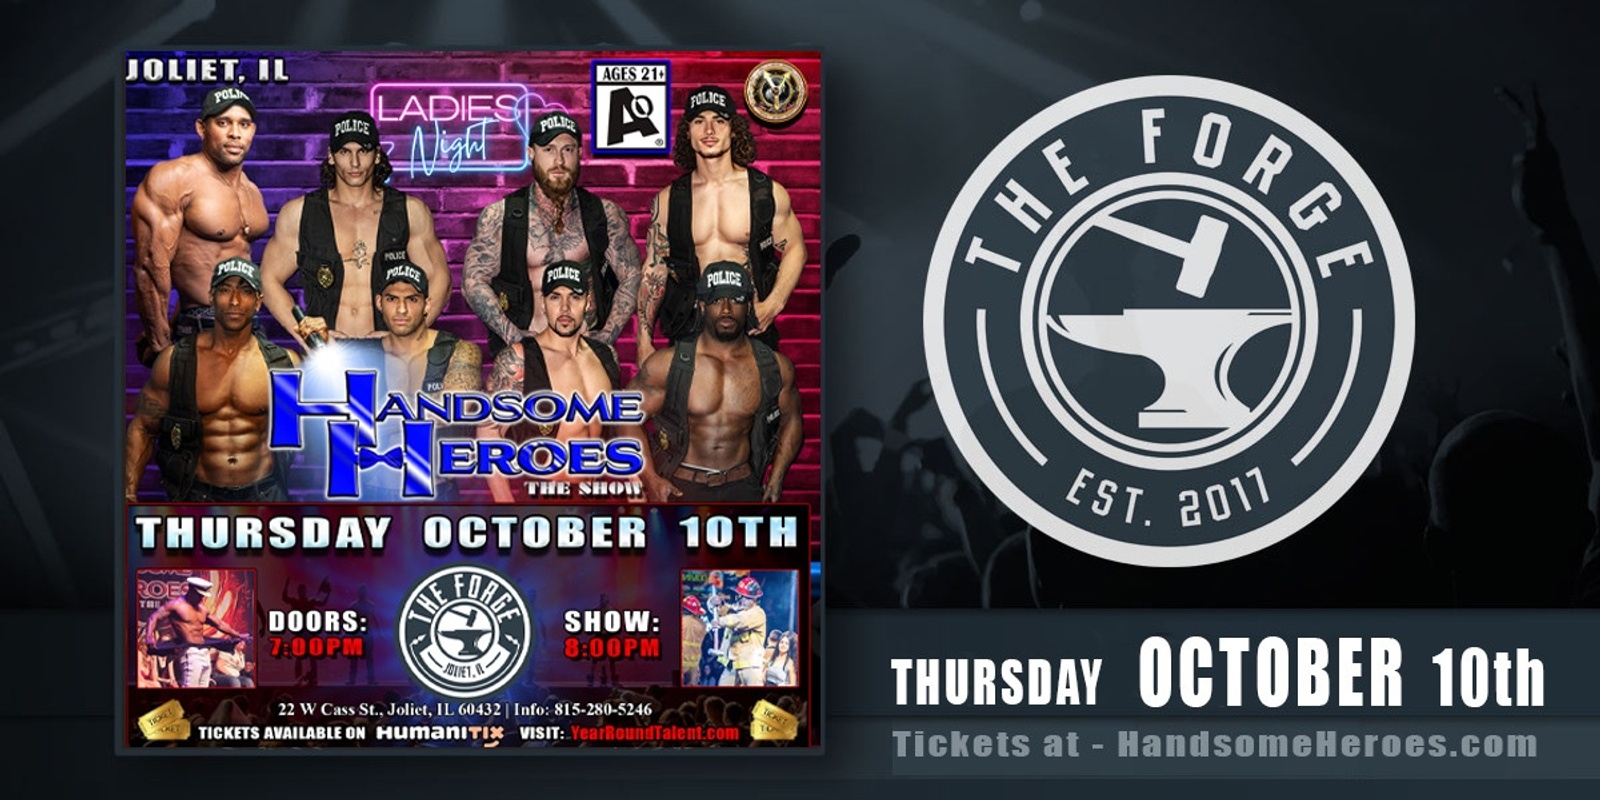 Banner image for Joliet, IL - Handsome Heroes: The Show, Round #4! "Not All Heroes Wear Capes, Some Heroes Wear Nothing!"